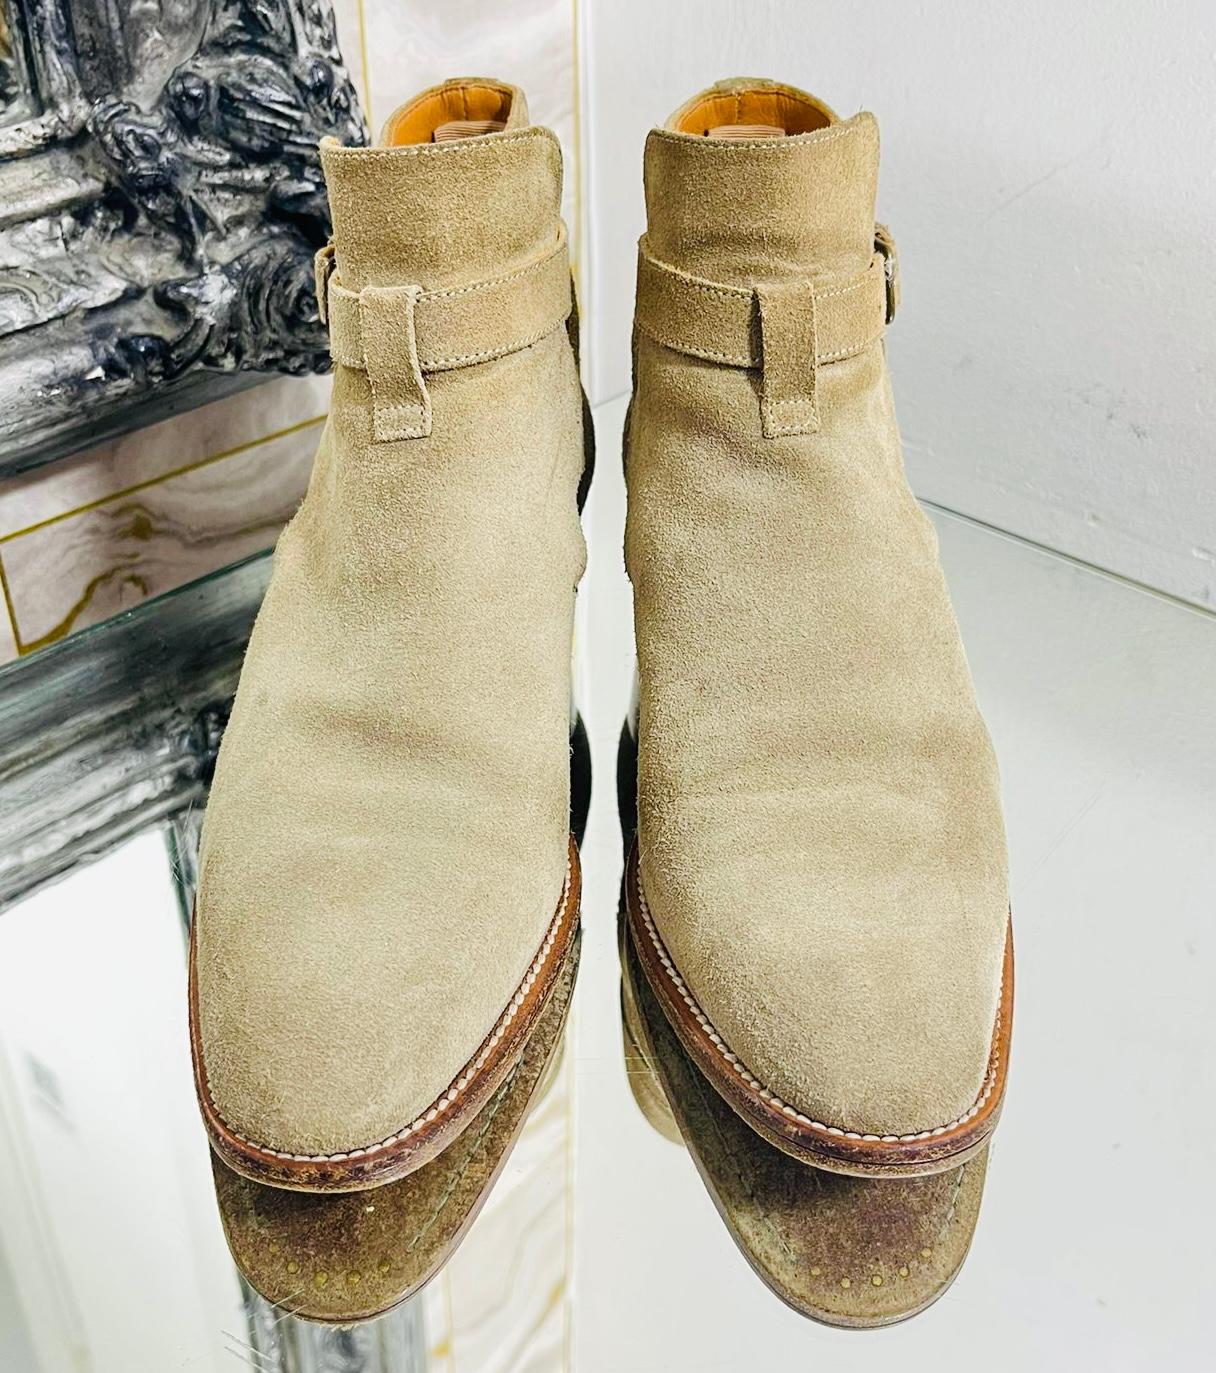 Saint Laurent Ratched Suede Ankle Boots

Beige boots designed with buckled strap detailing.

Featuring almond toe, stacked heel and leather lining. Rrp £945

Size – 35

Condition – Very Good

Composition – Calf Suede 

Comes with – Shoes Only 